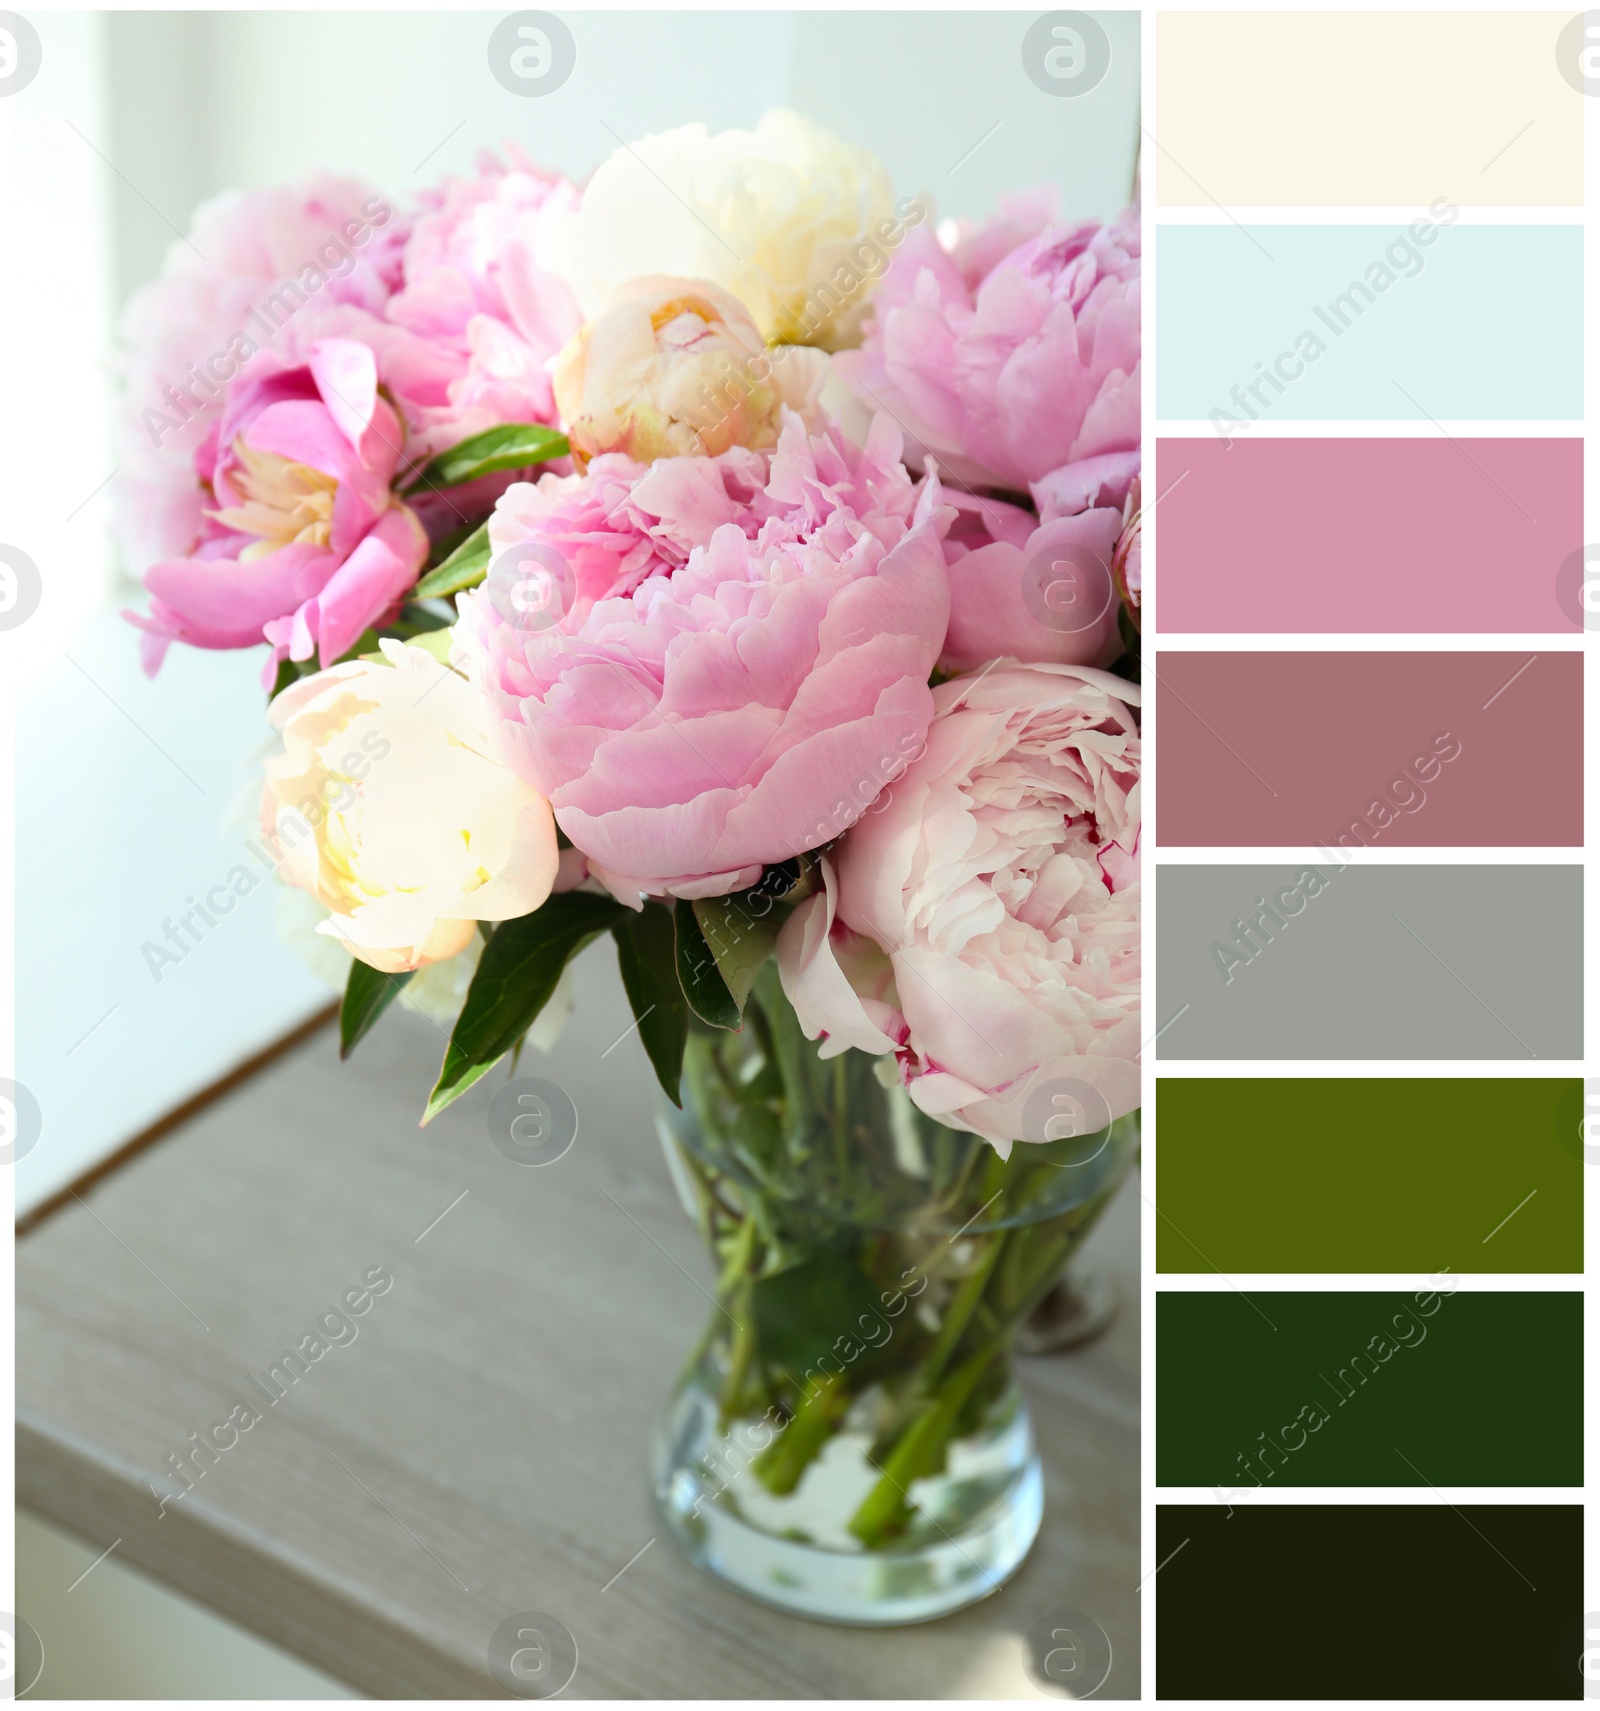 Image of Bouquet of beautiful peonies in vase on wooden table and color palette. Collage